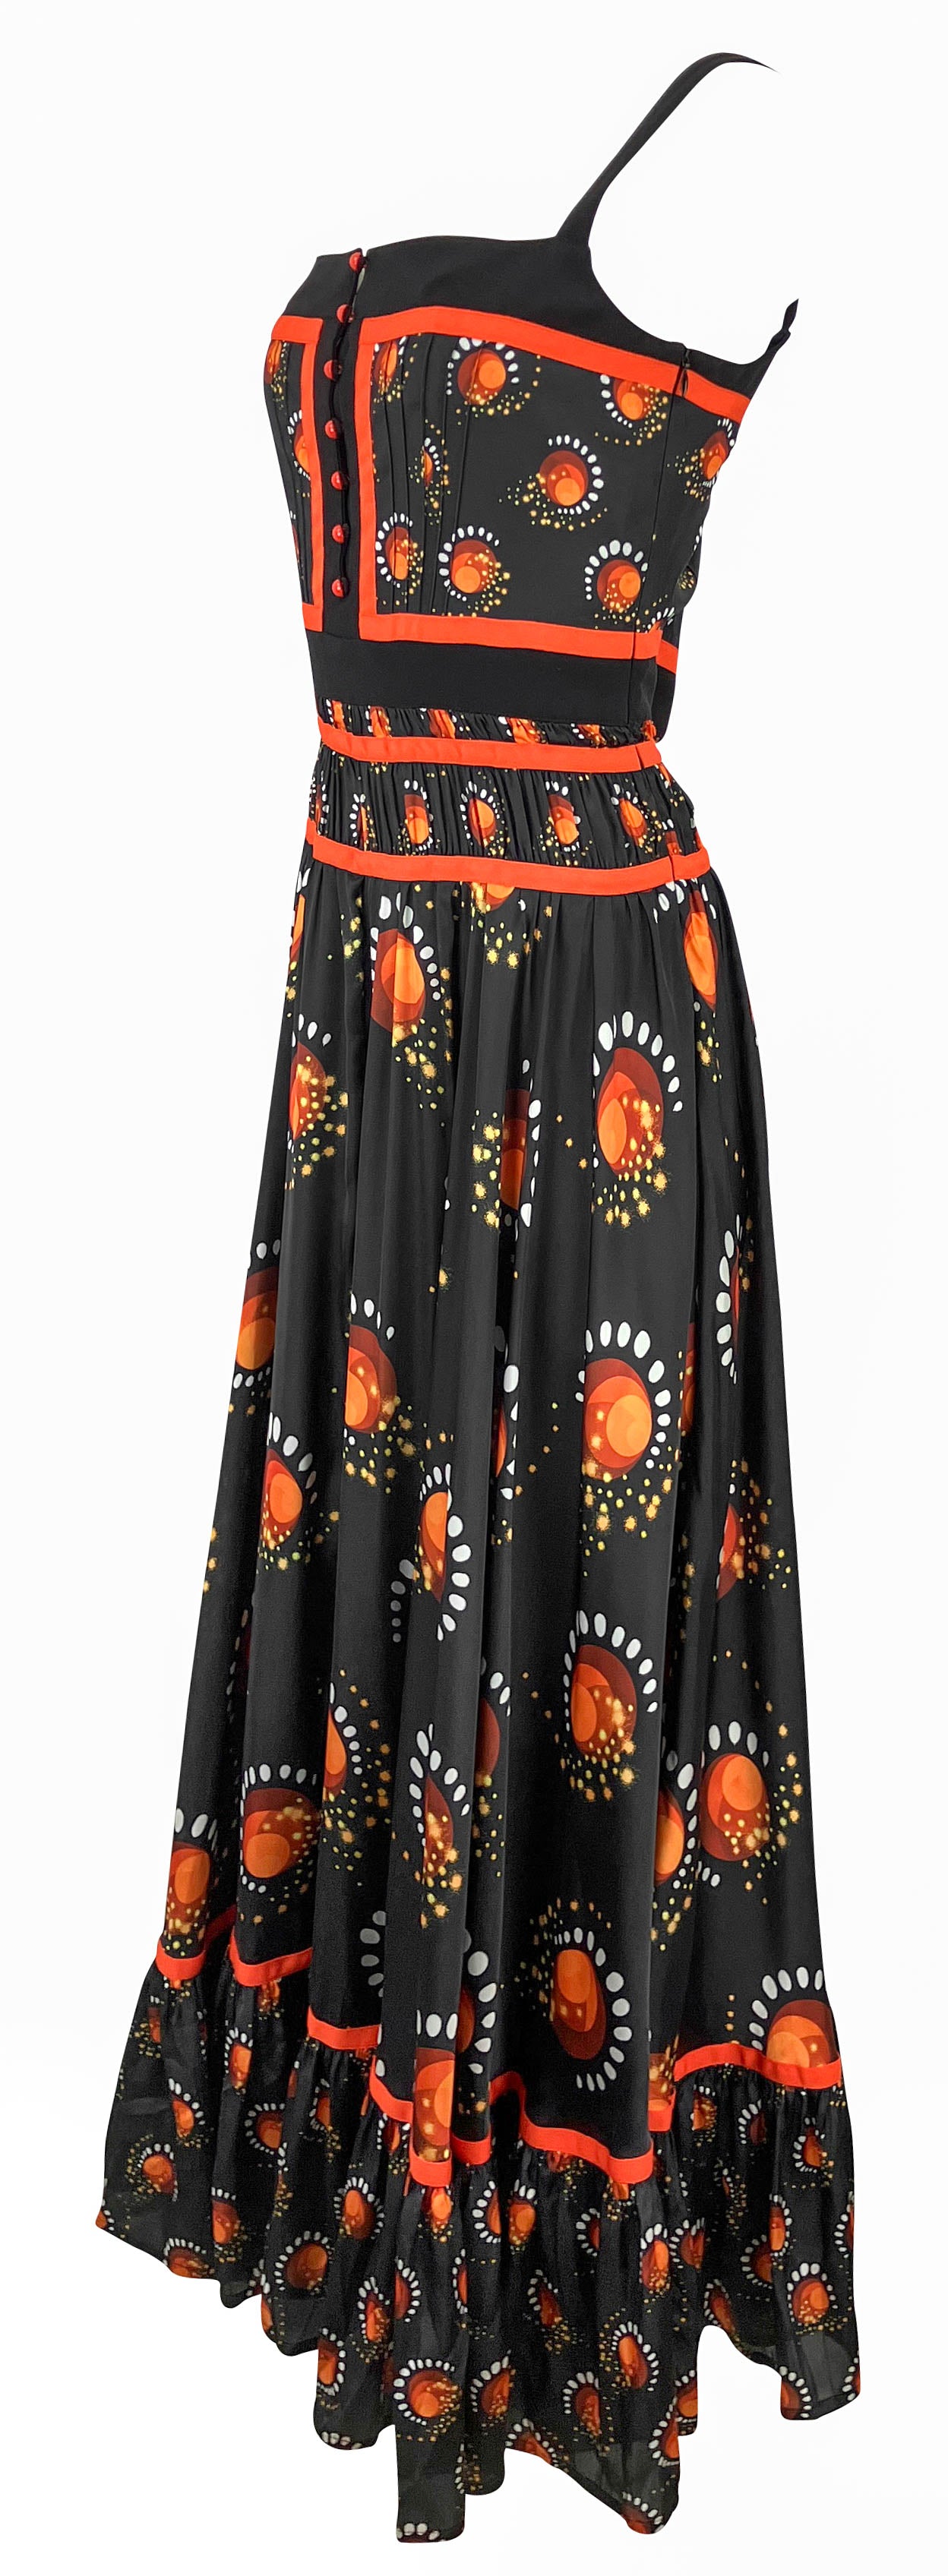 Paco Rabanne Graphic Printed Flared Maxi Dress - Discounts on Paco Rabanne at UAL